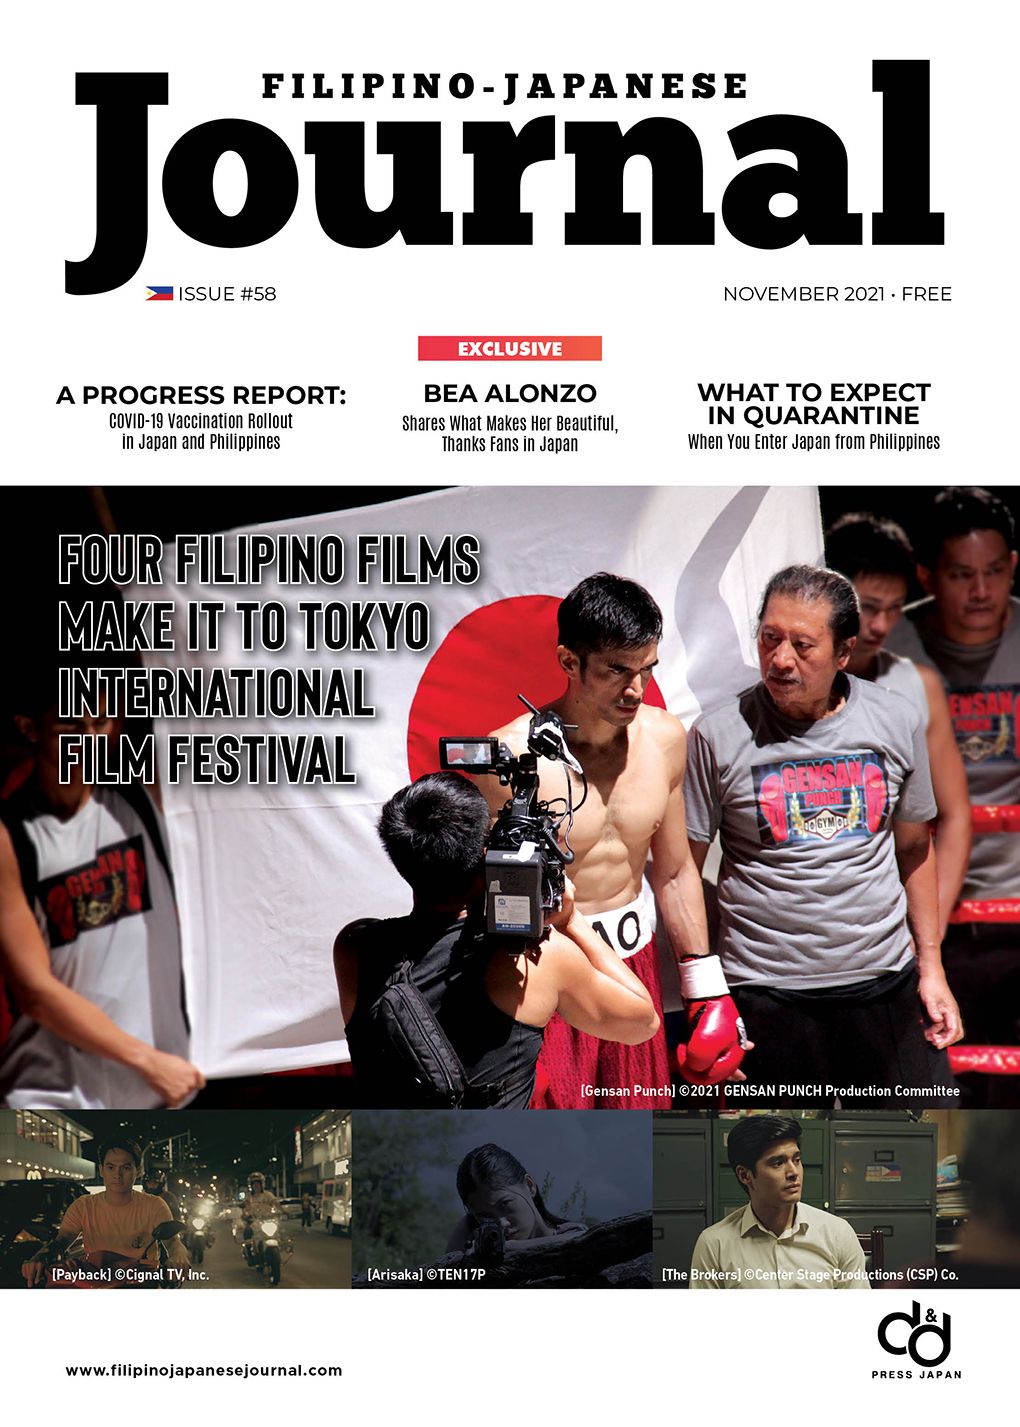 Filipino-Japanese Journal to Return with Print Issue Feat. PH Films at Tokyo Fest